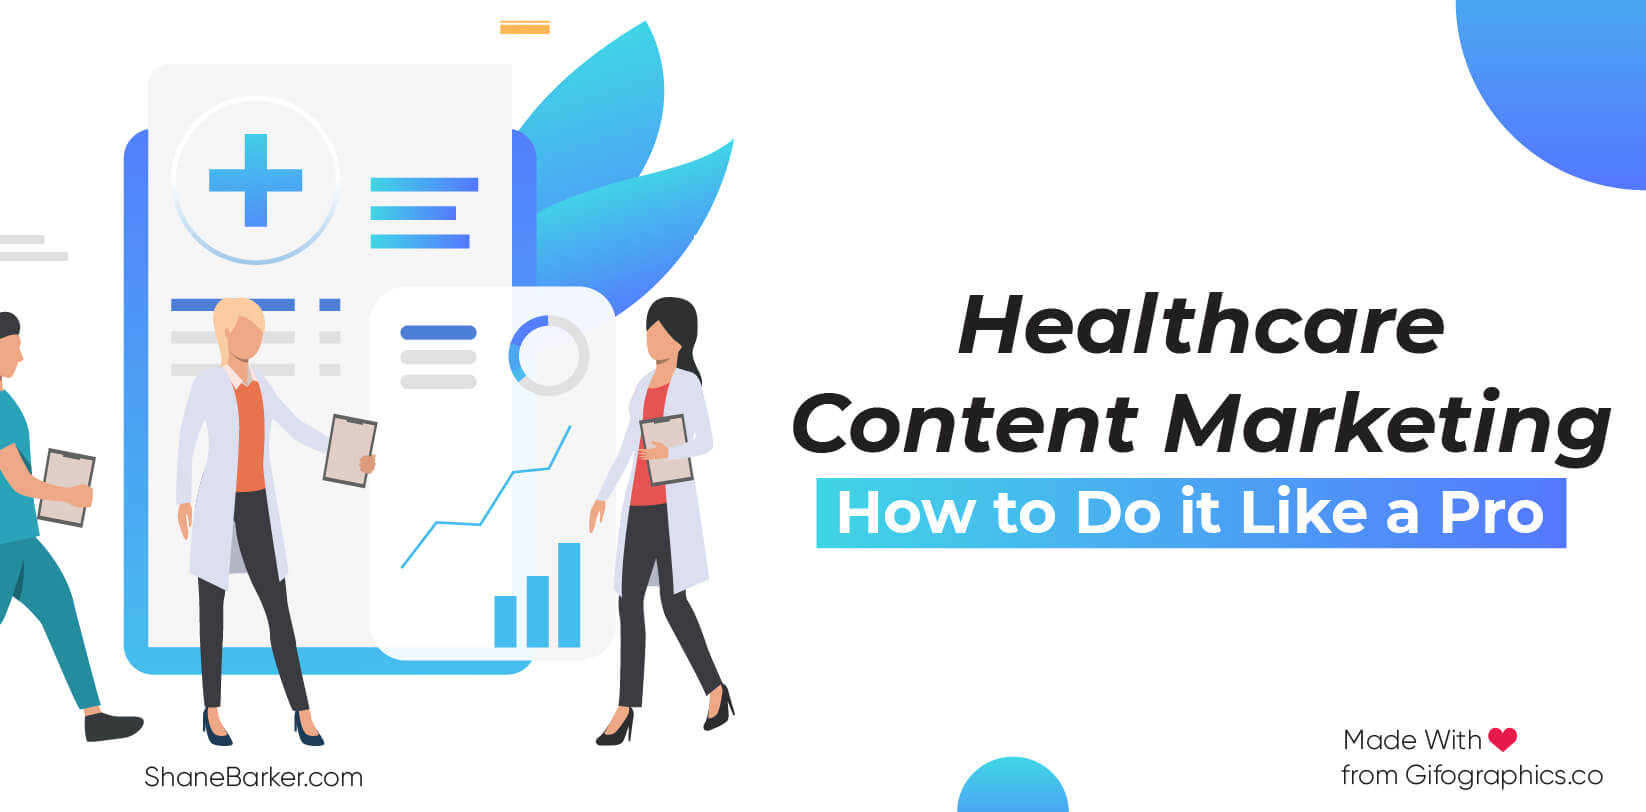 healthcare content marketing: how to do it like a pro